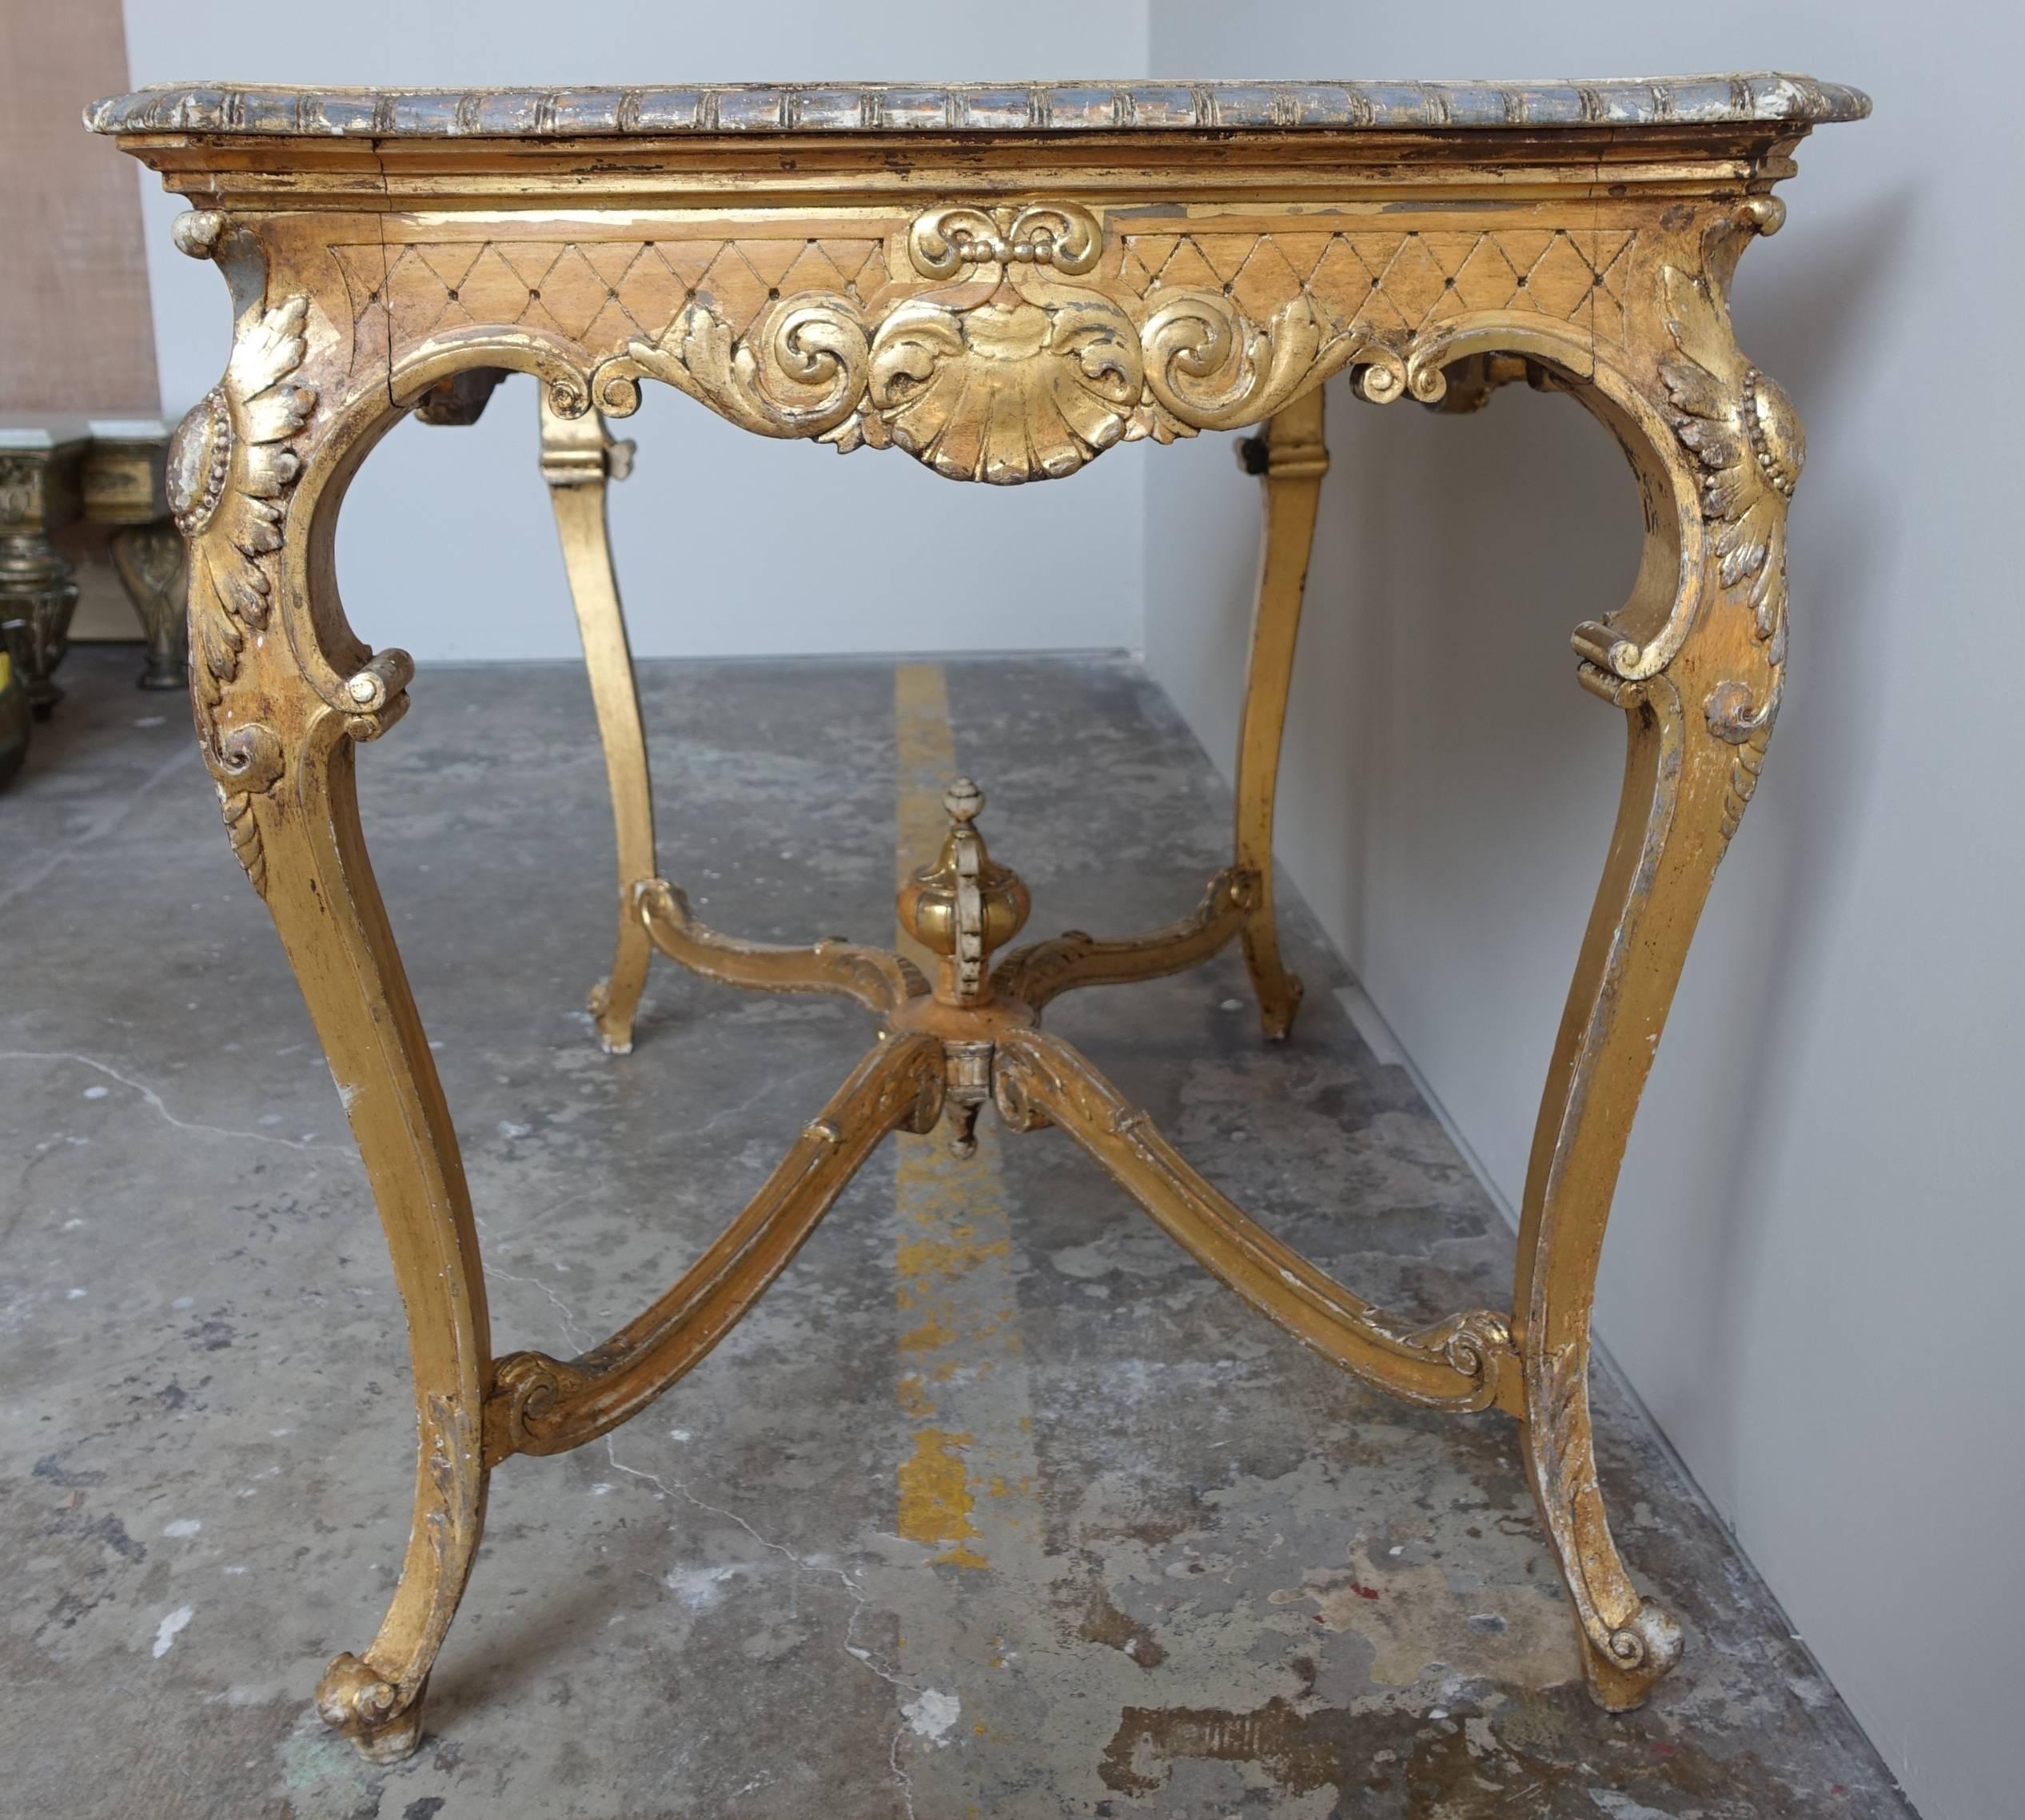 19th Century French Giltwood Table with Center Urn and Shell Design (19. Jahrhundert)